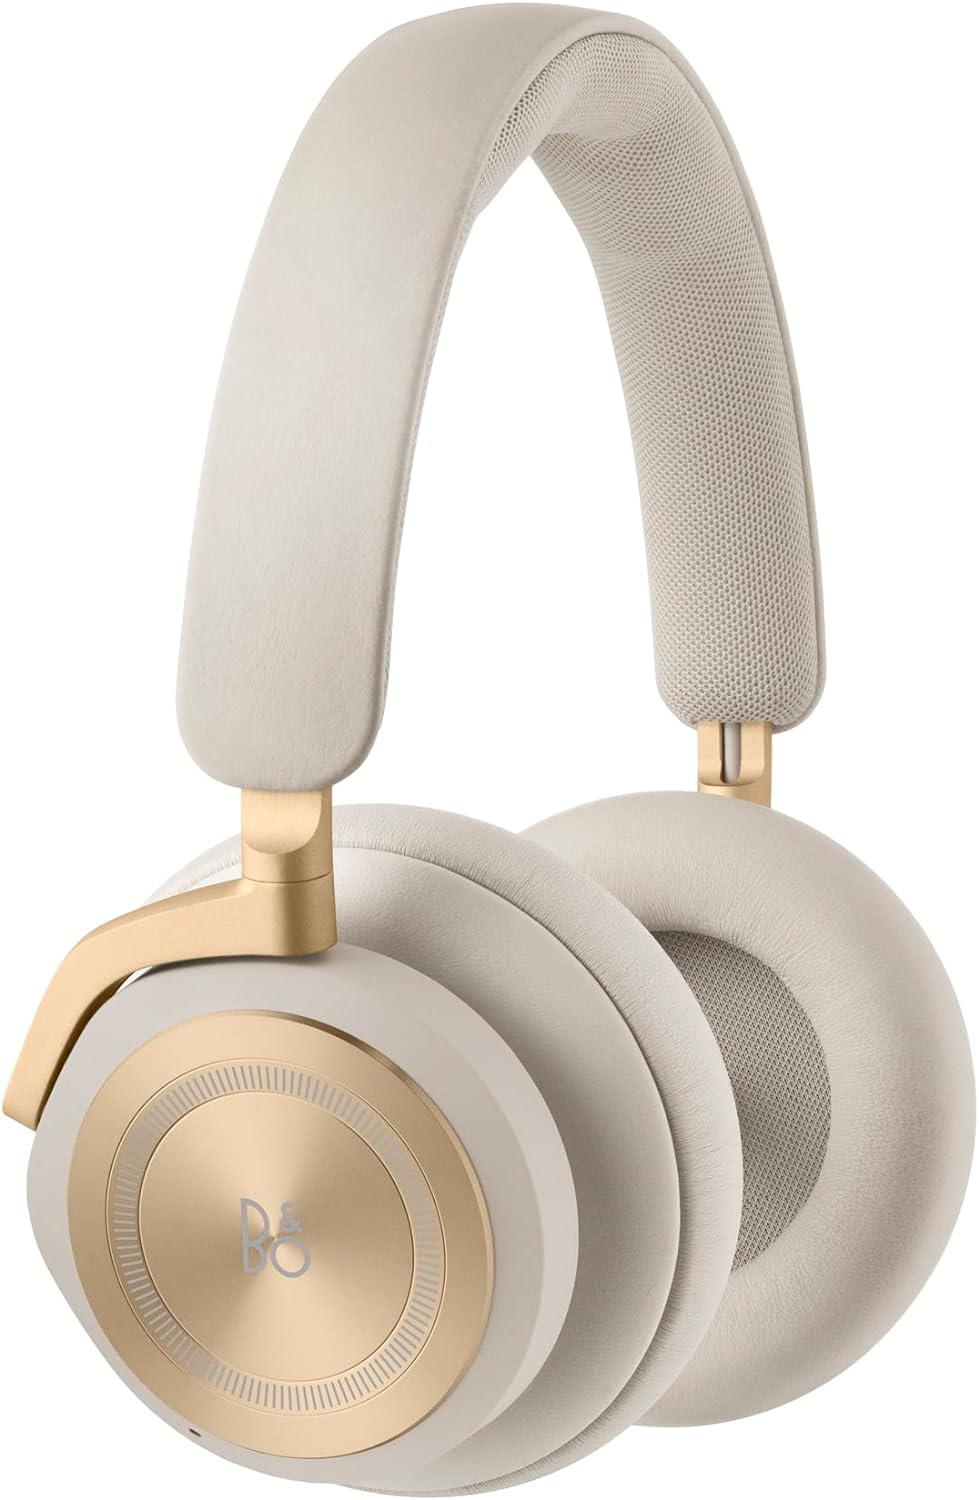 Bang & Olufsen Beoplay HX Review: Comfortable ANC Headphones with Elegant Design